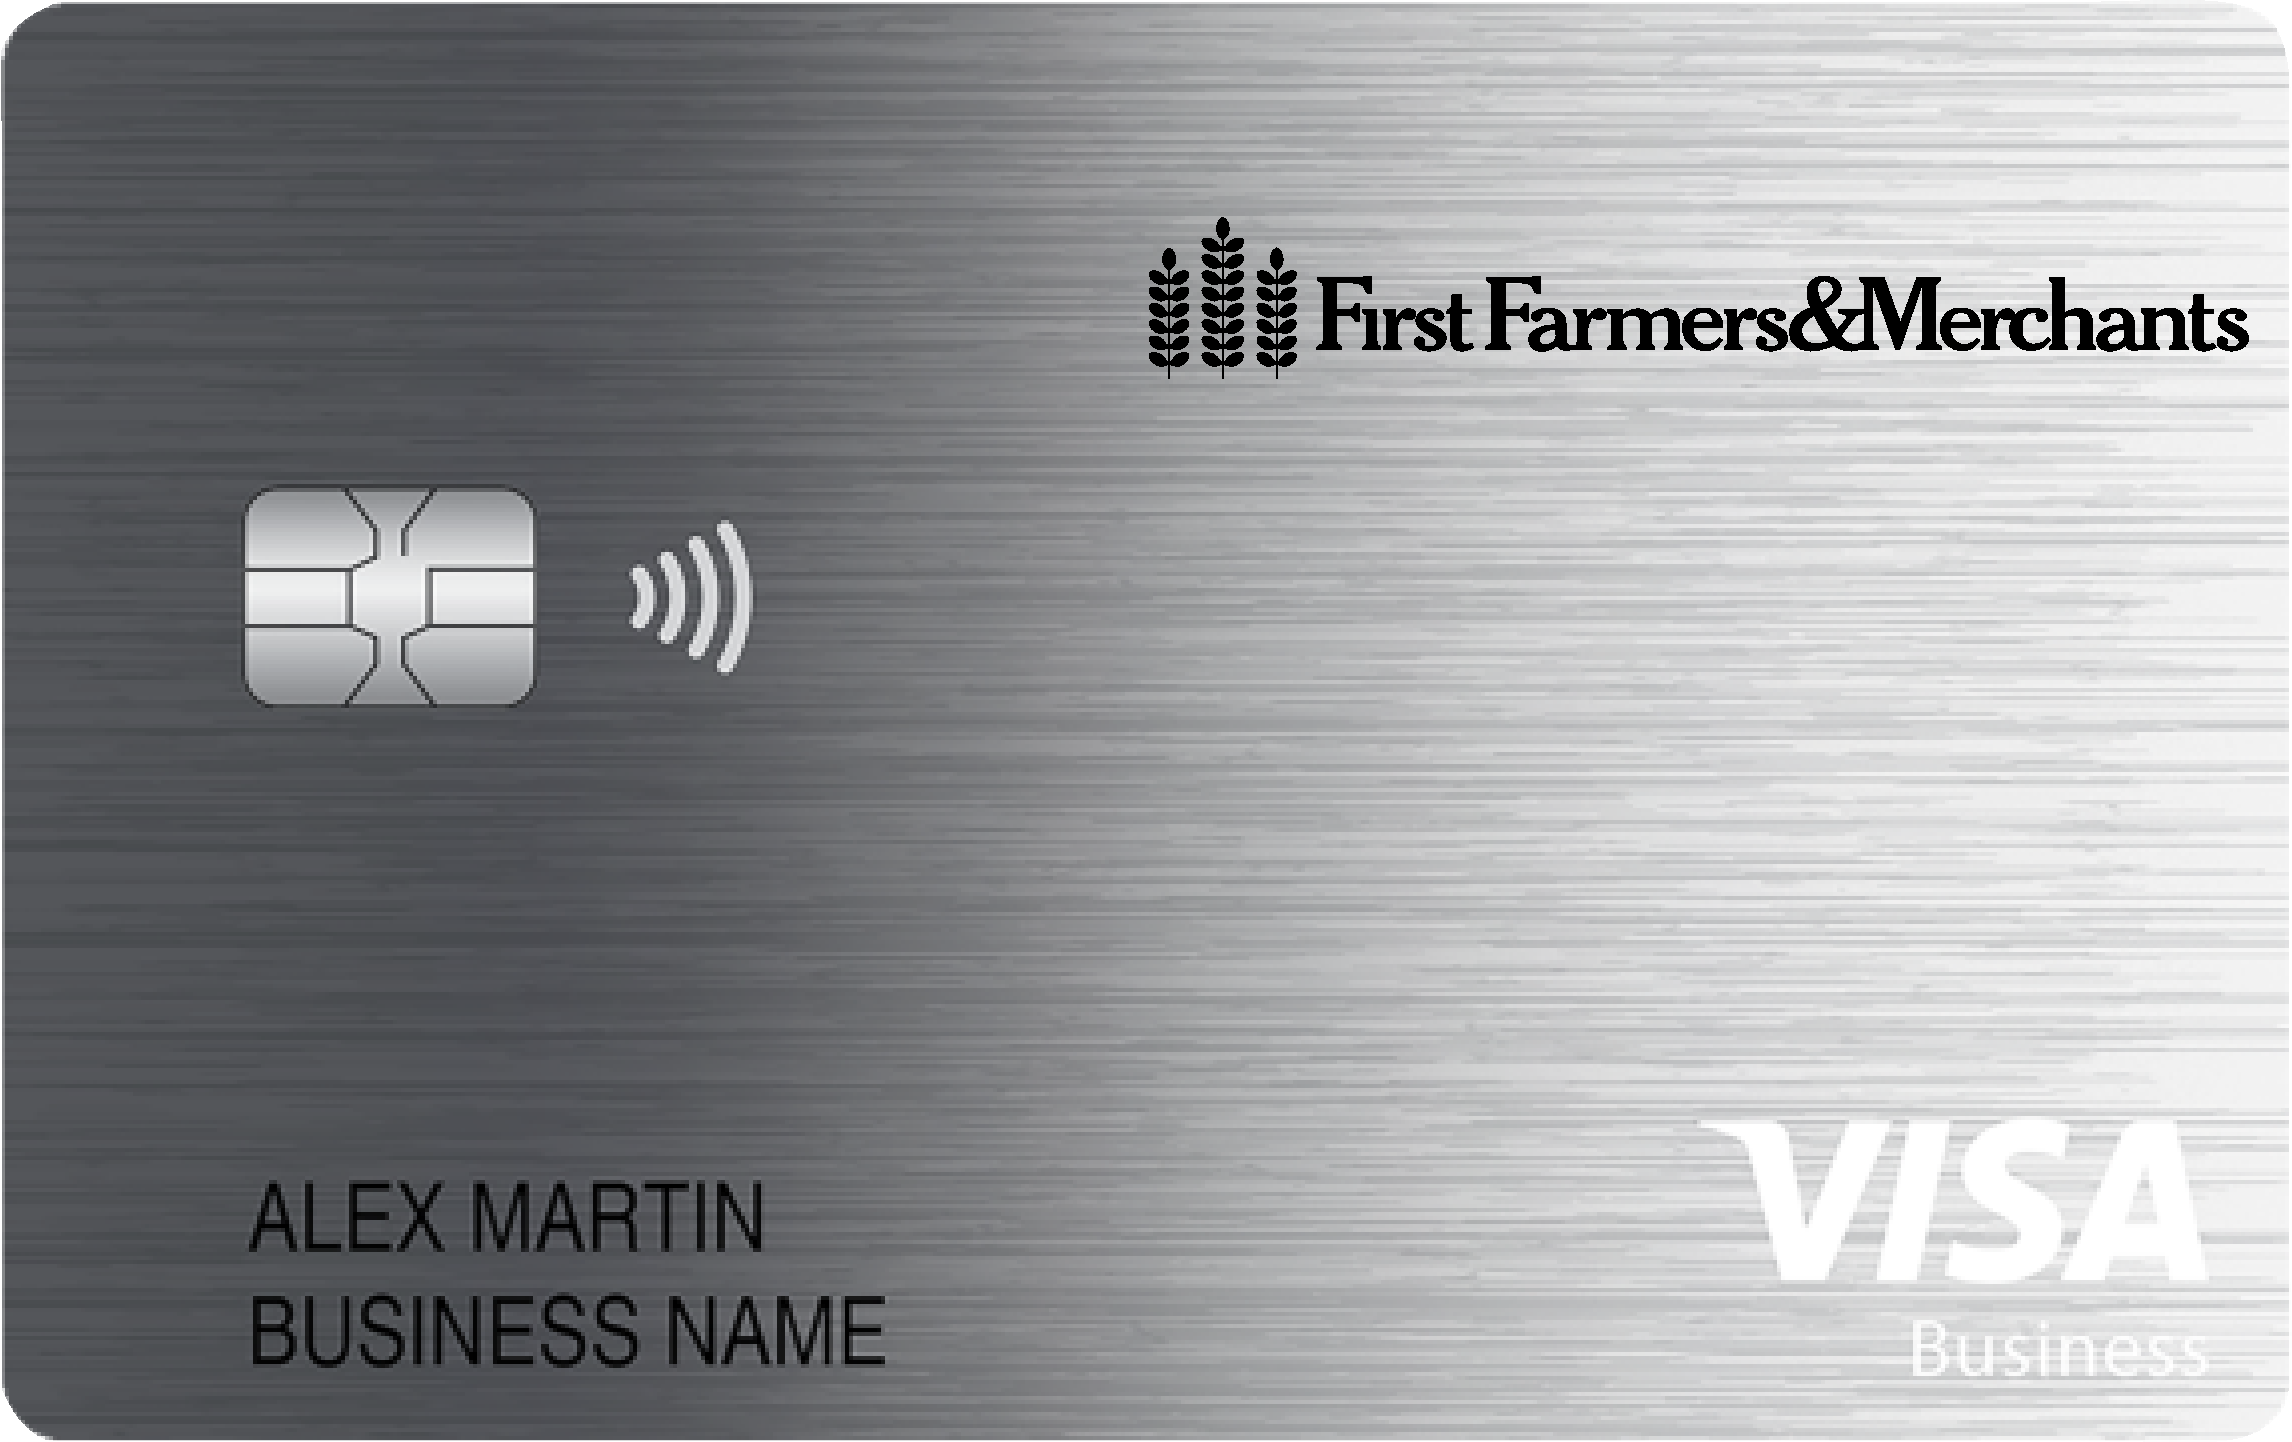 First Farmers & Merchants State Bank Business Cash Preferred  Card